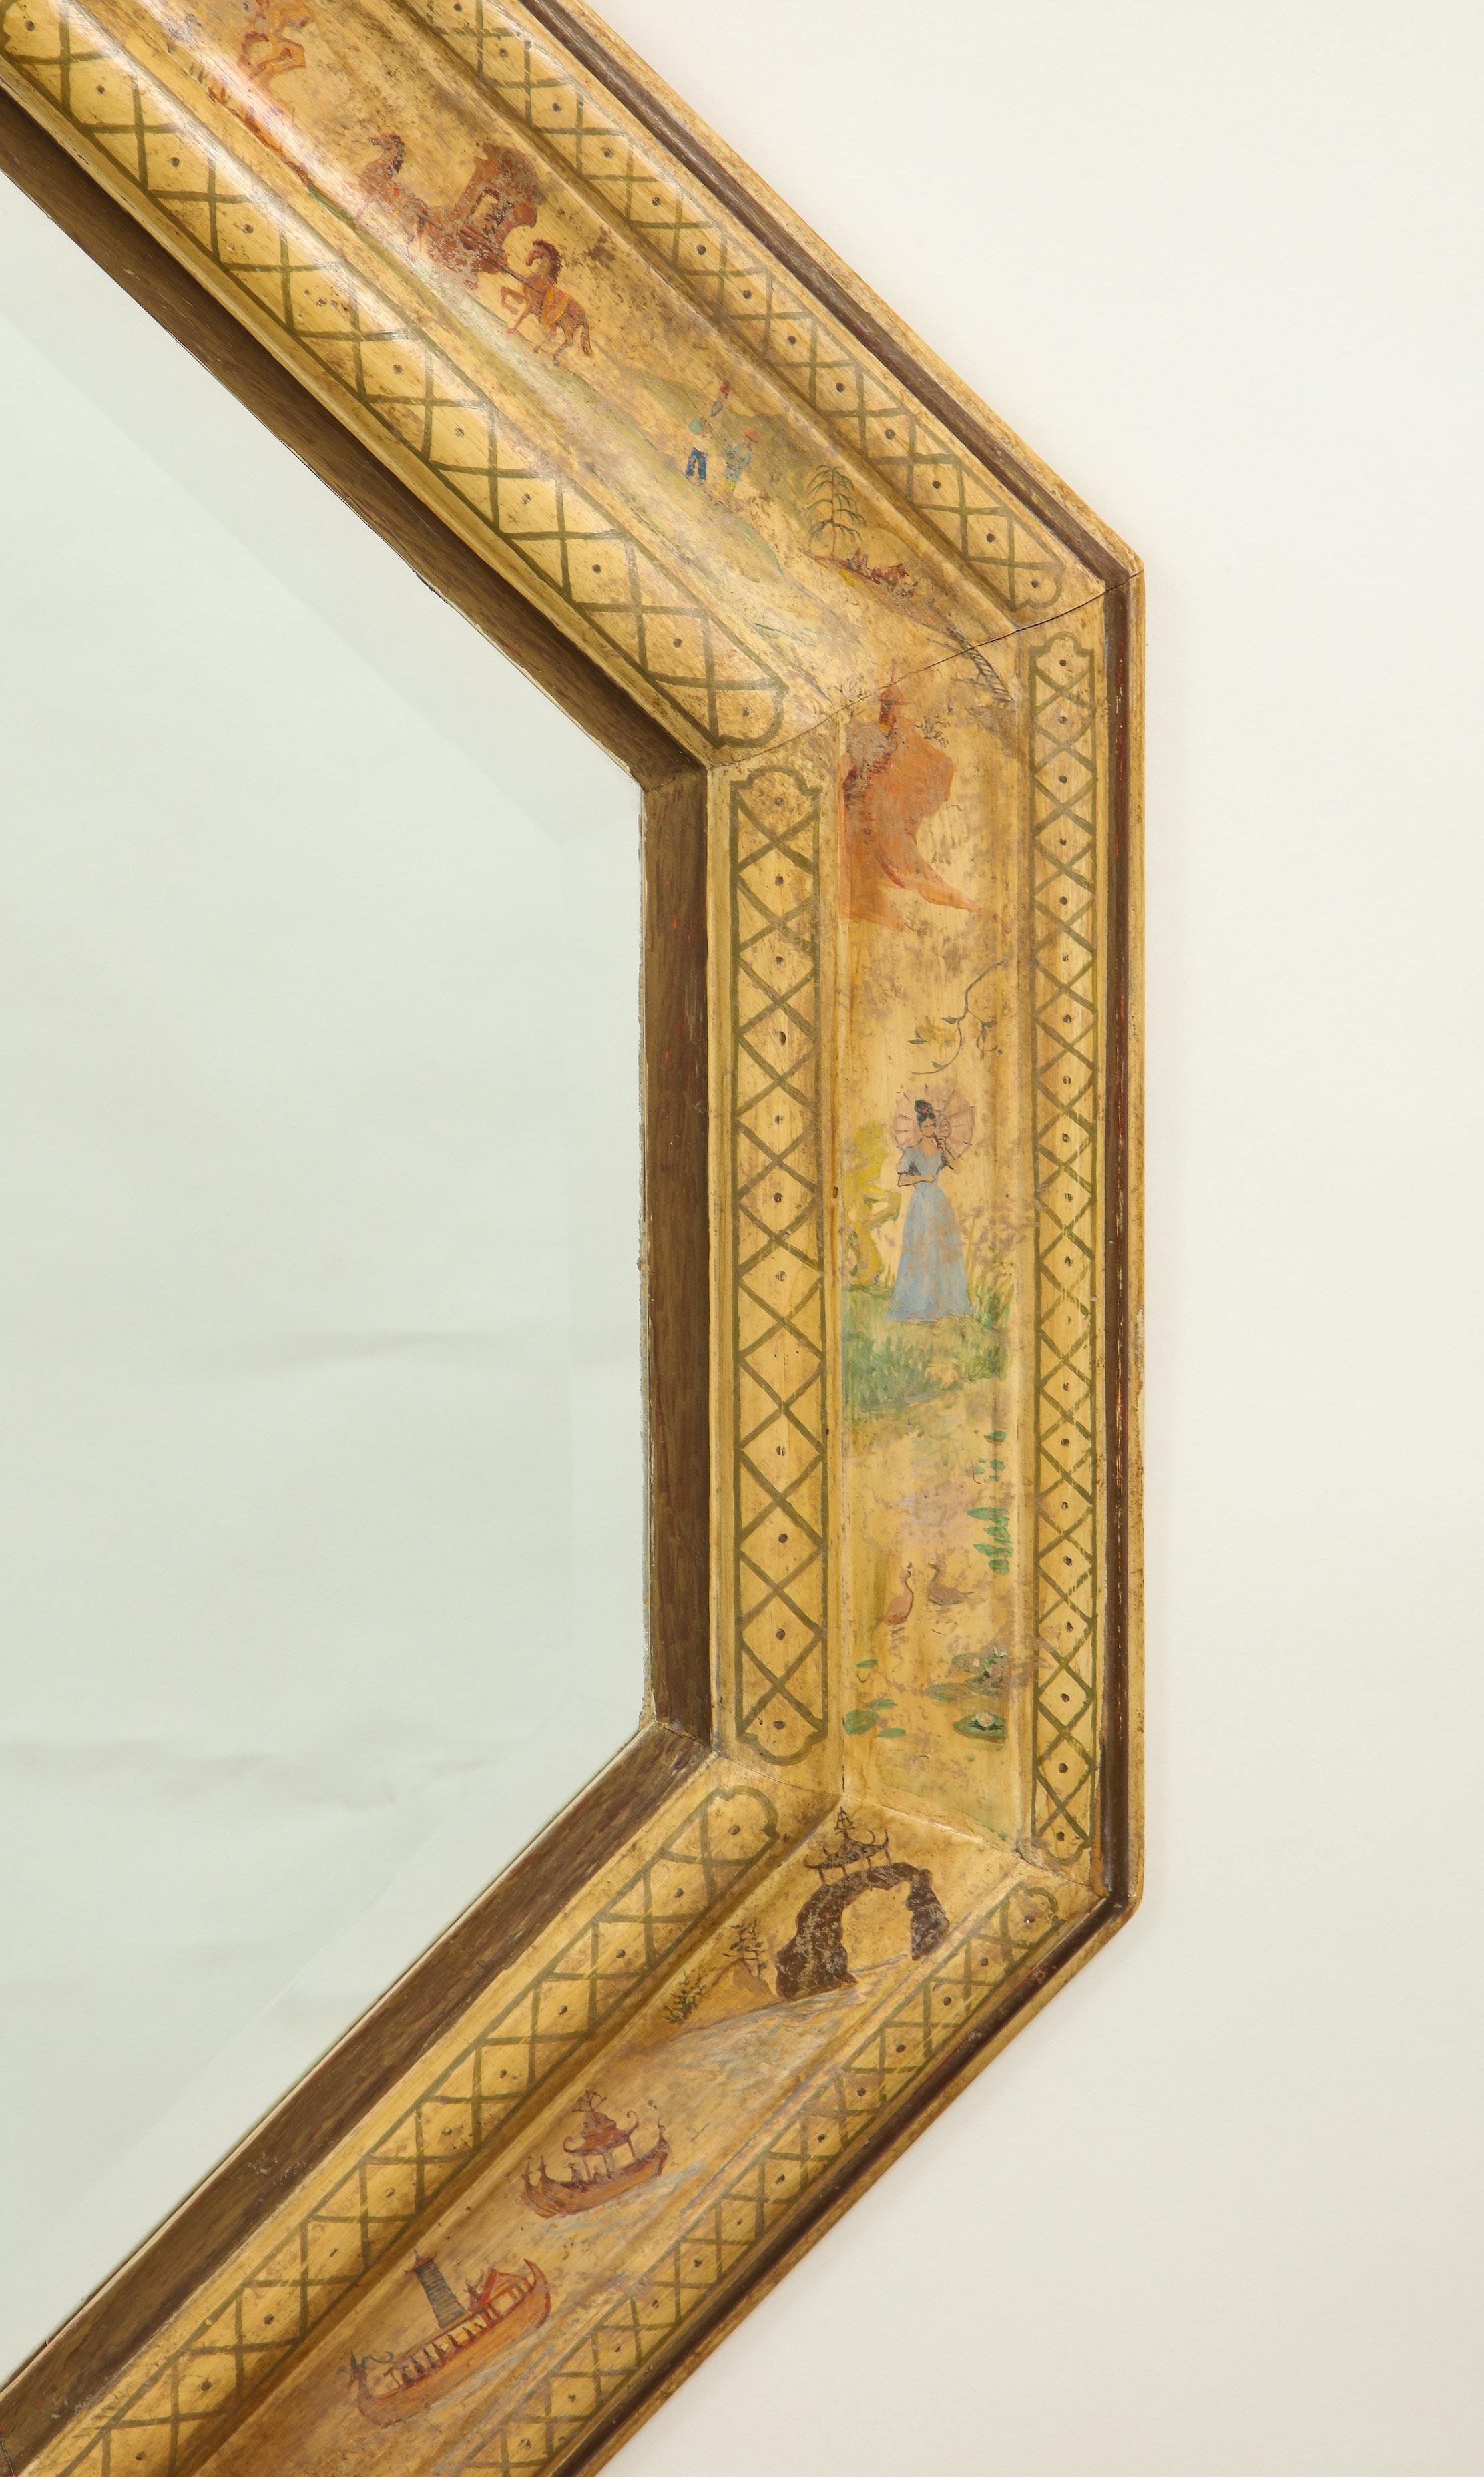 The octagonal mirrored plate within a gilt slip and cushion frame charmingly hand painted with scenes of European figures in pastoral settings on a parchment-colored ground.